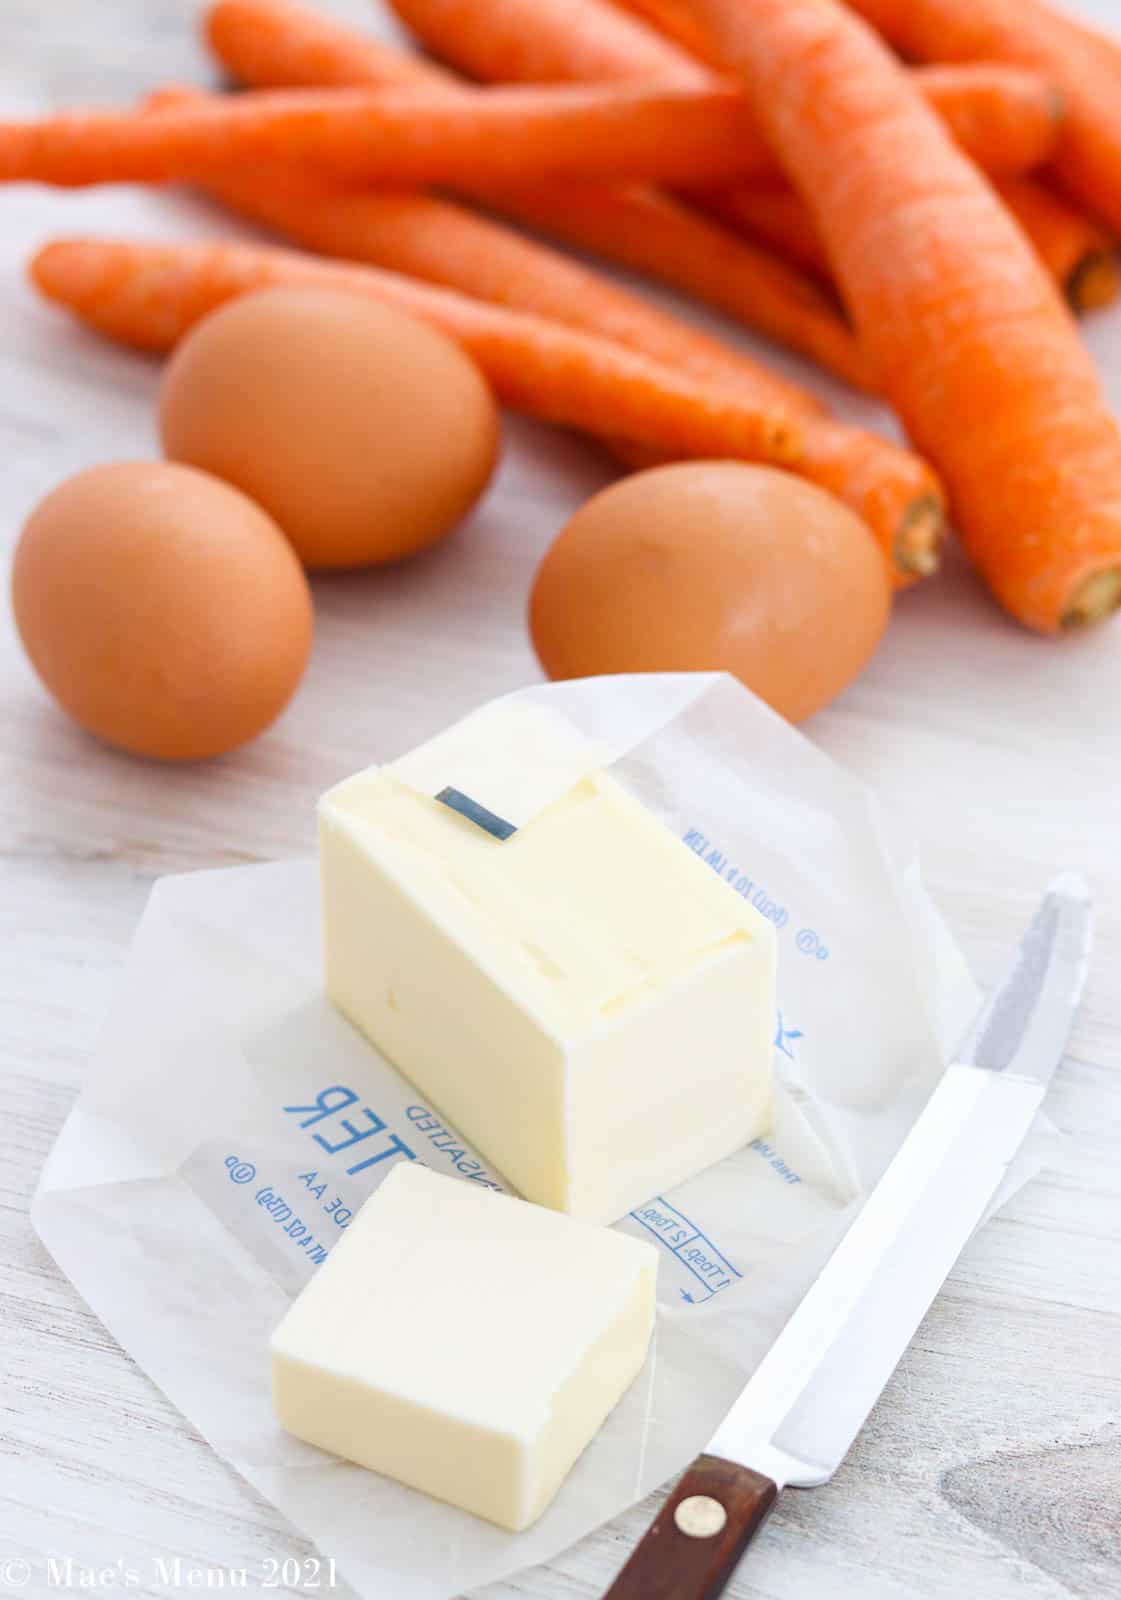 Ingredients for carrot souffle -- butter, eggs, carrots, etc.